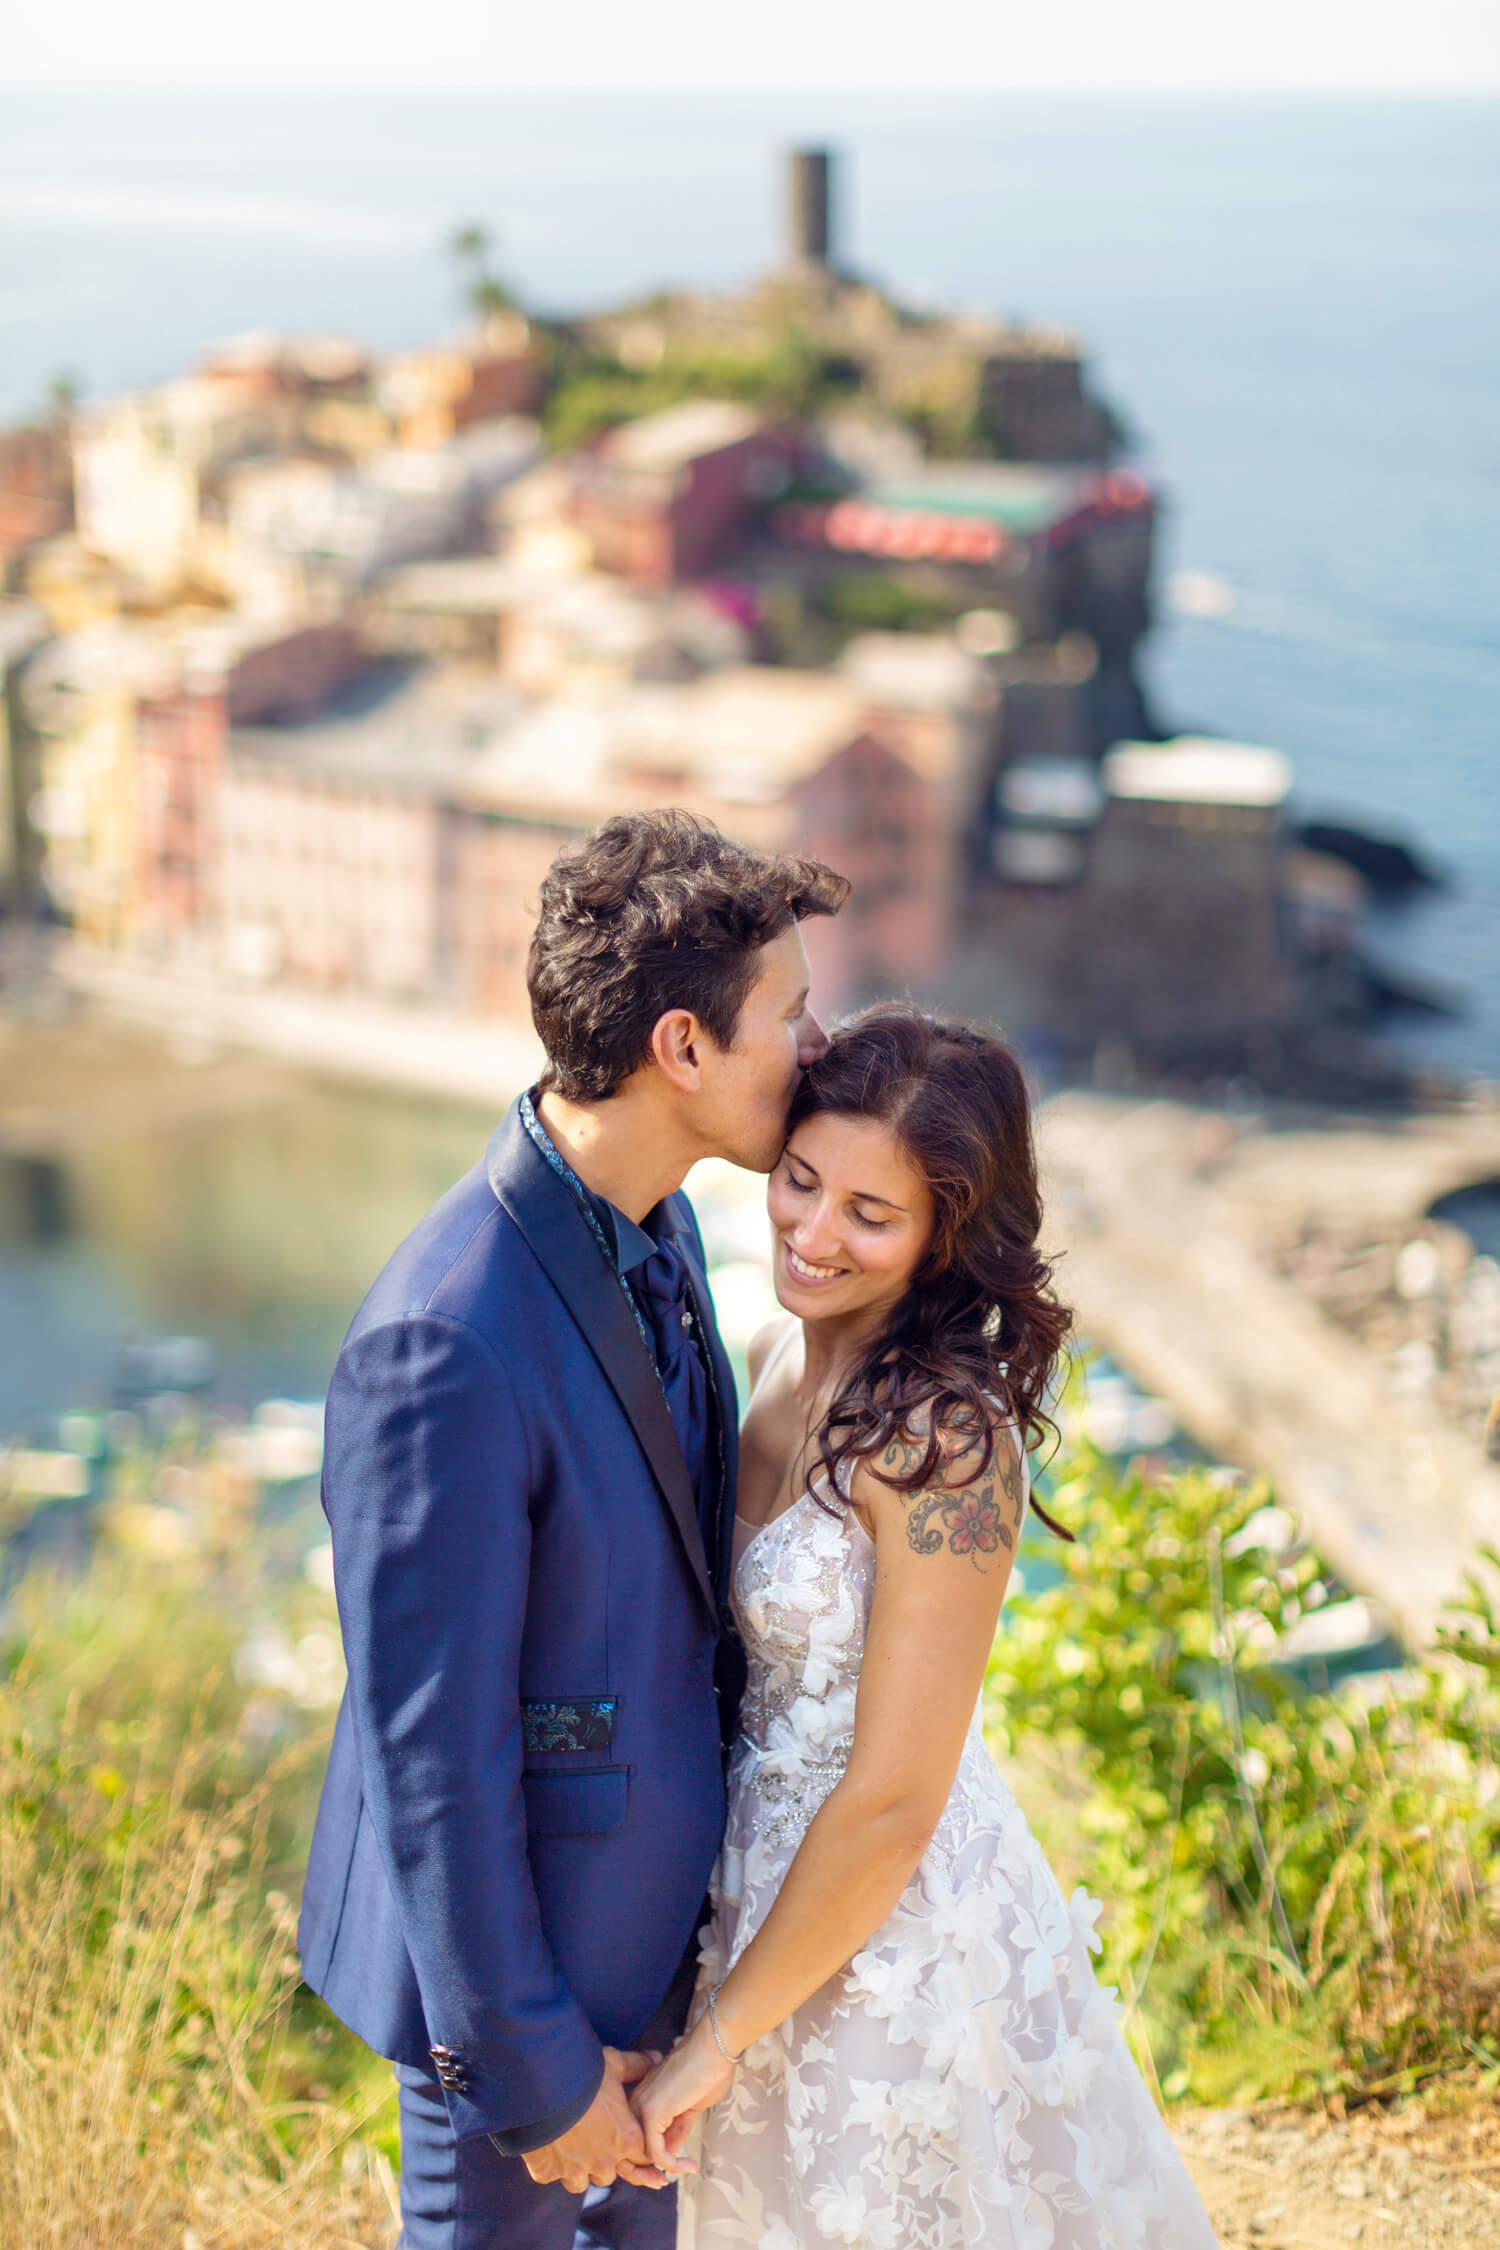 Bride and Groom during their post-wedding photoshoot in Cinque Terre